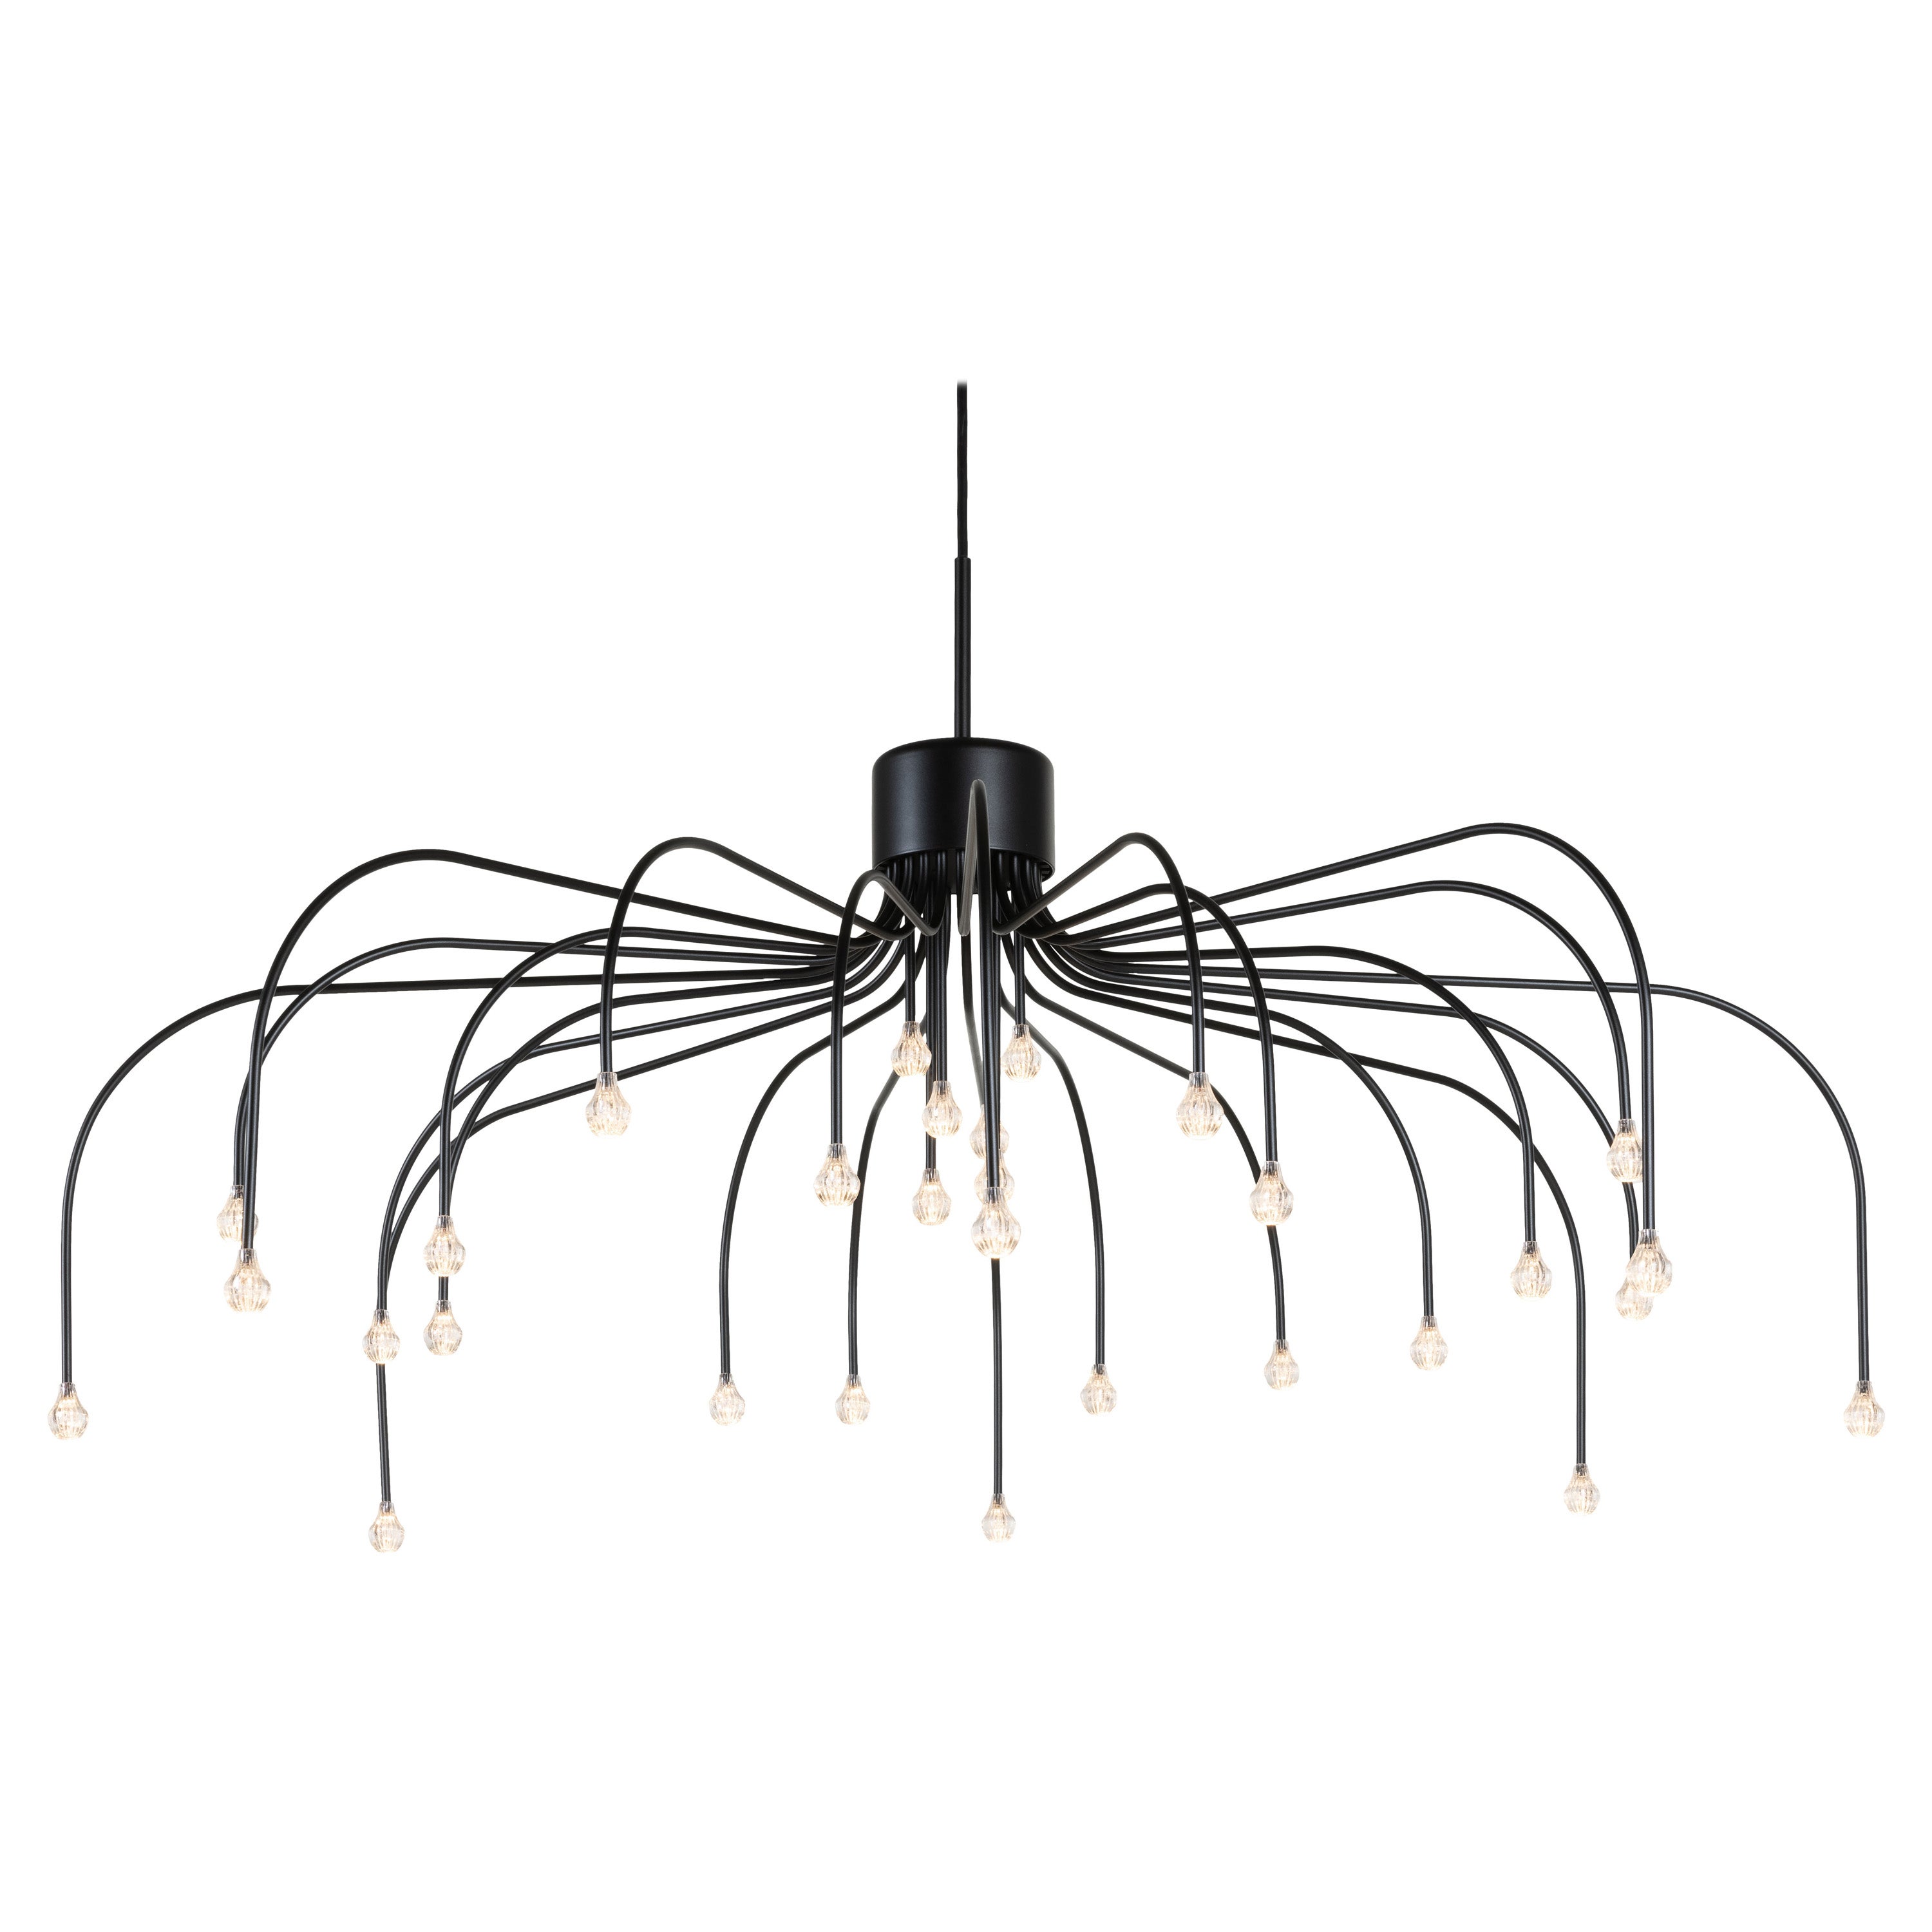 Moooi Starfall Light 30 Circular Suspension Lamp in Black by Front Design For Sale